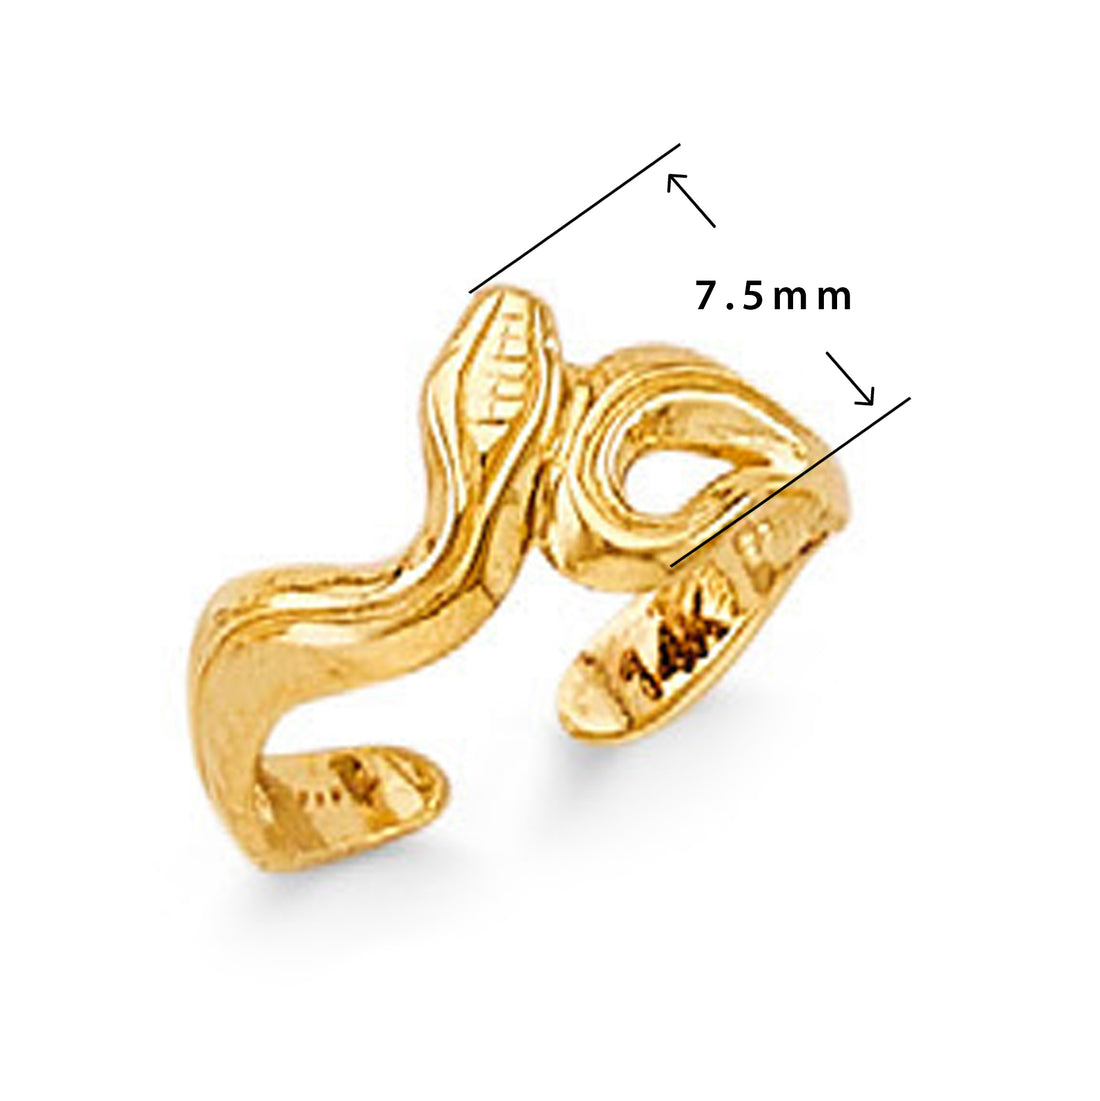 Twisted Snake Ring in Solid Gold with Measurement